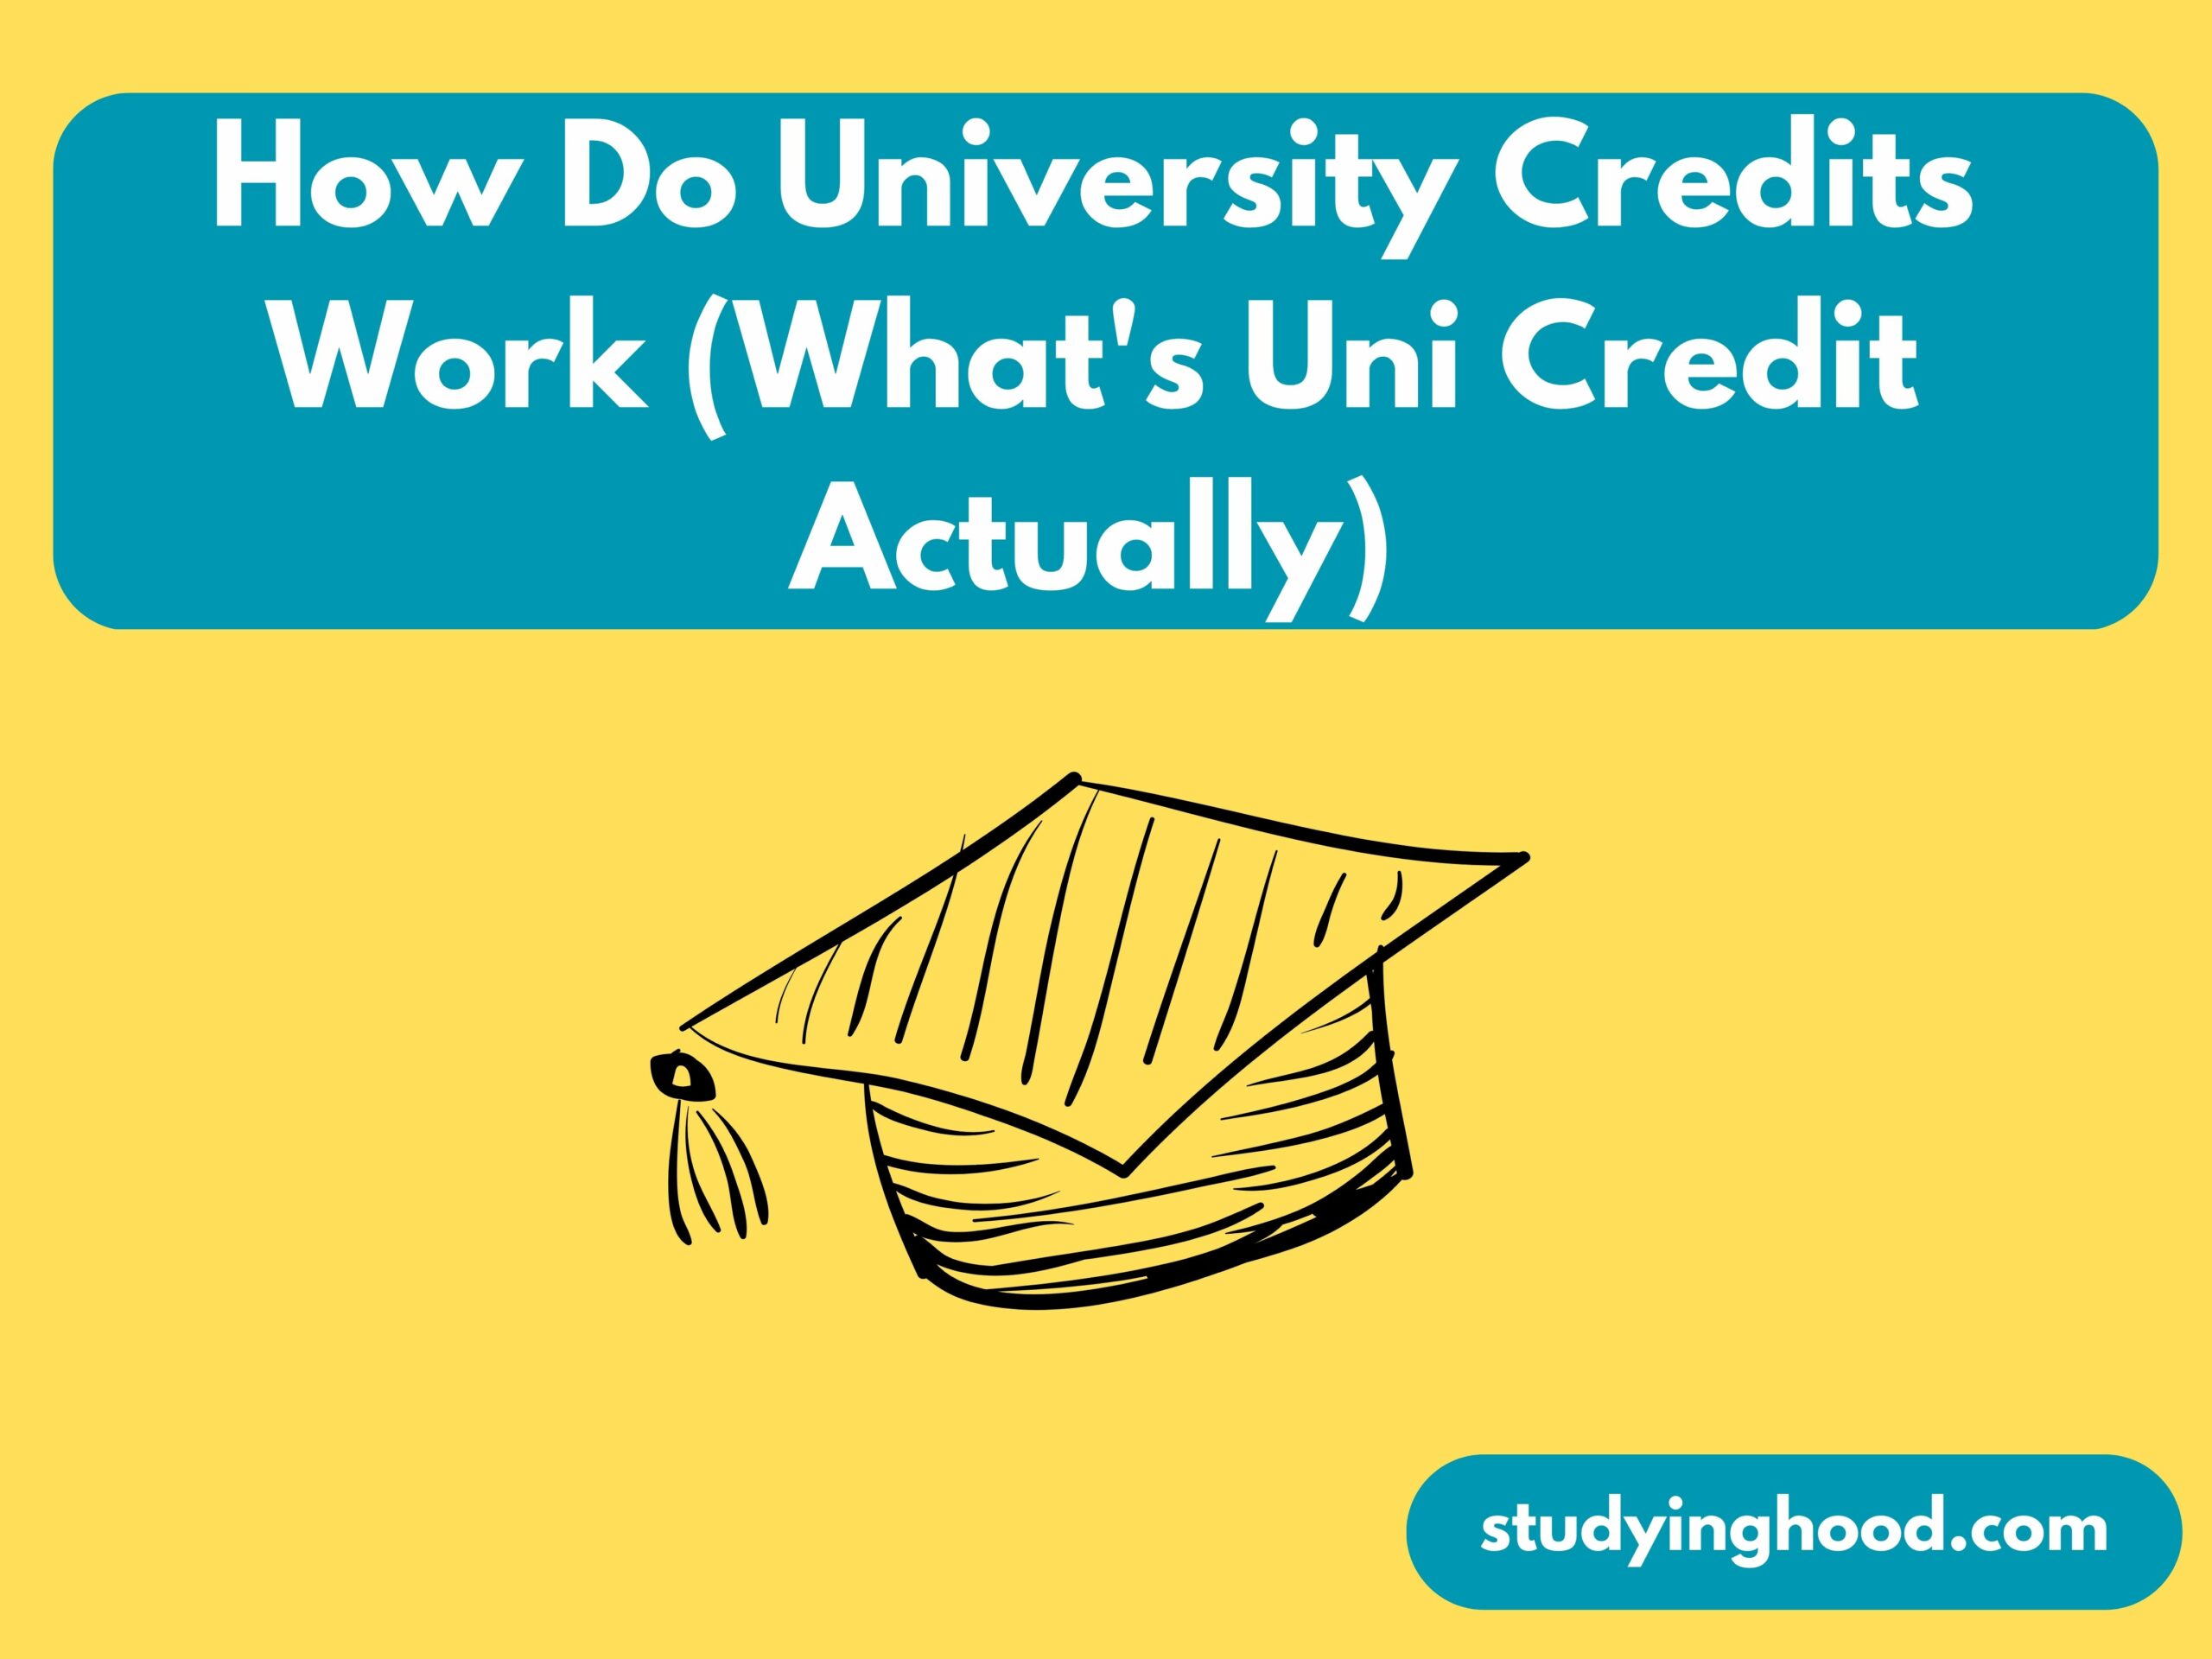 How Do University Credits Work (What's Uni Credit Actually)